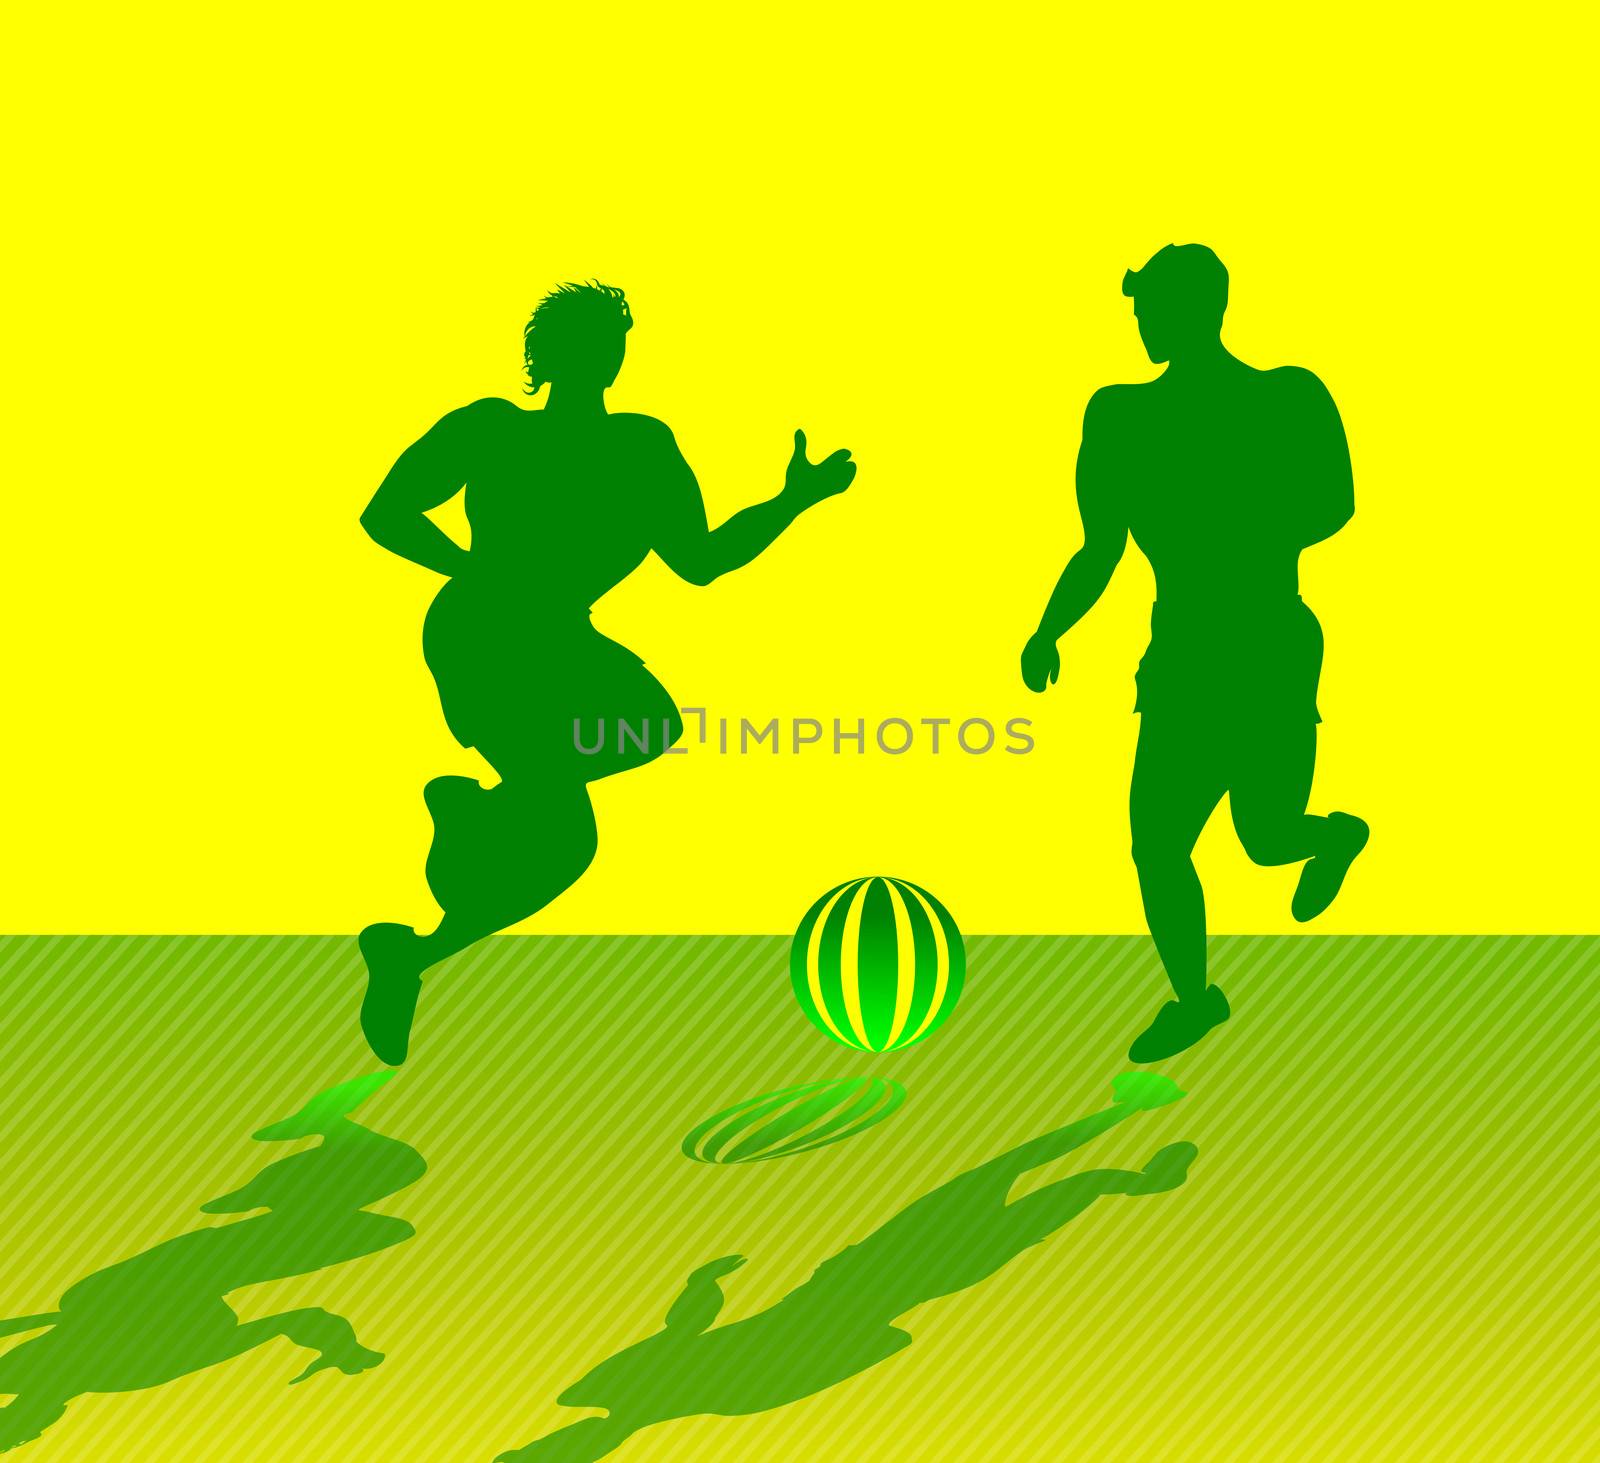 Silhouettes of two muscular men playing soccer, with yellow and green color scheme
